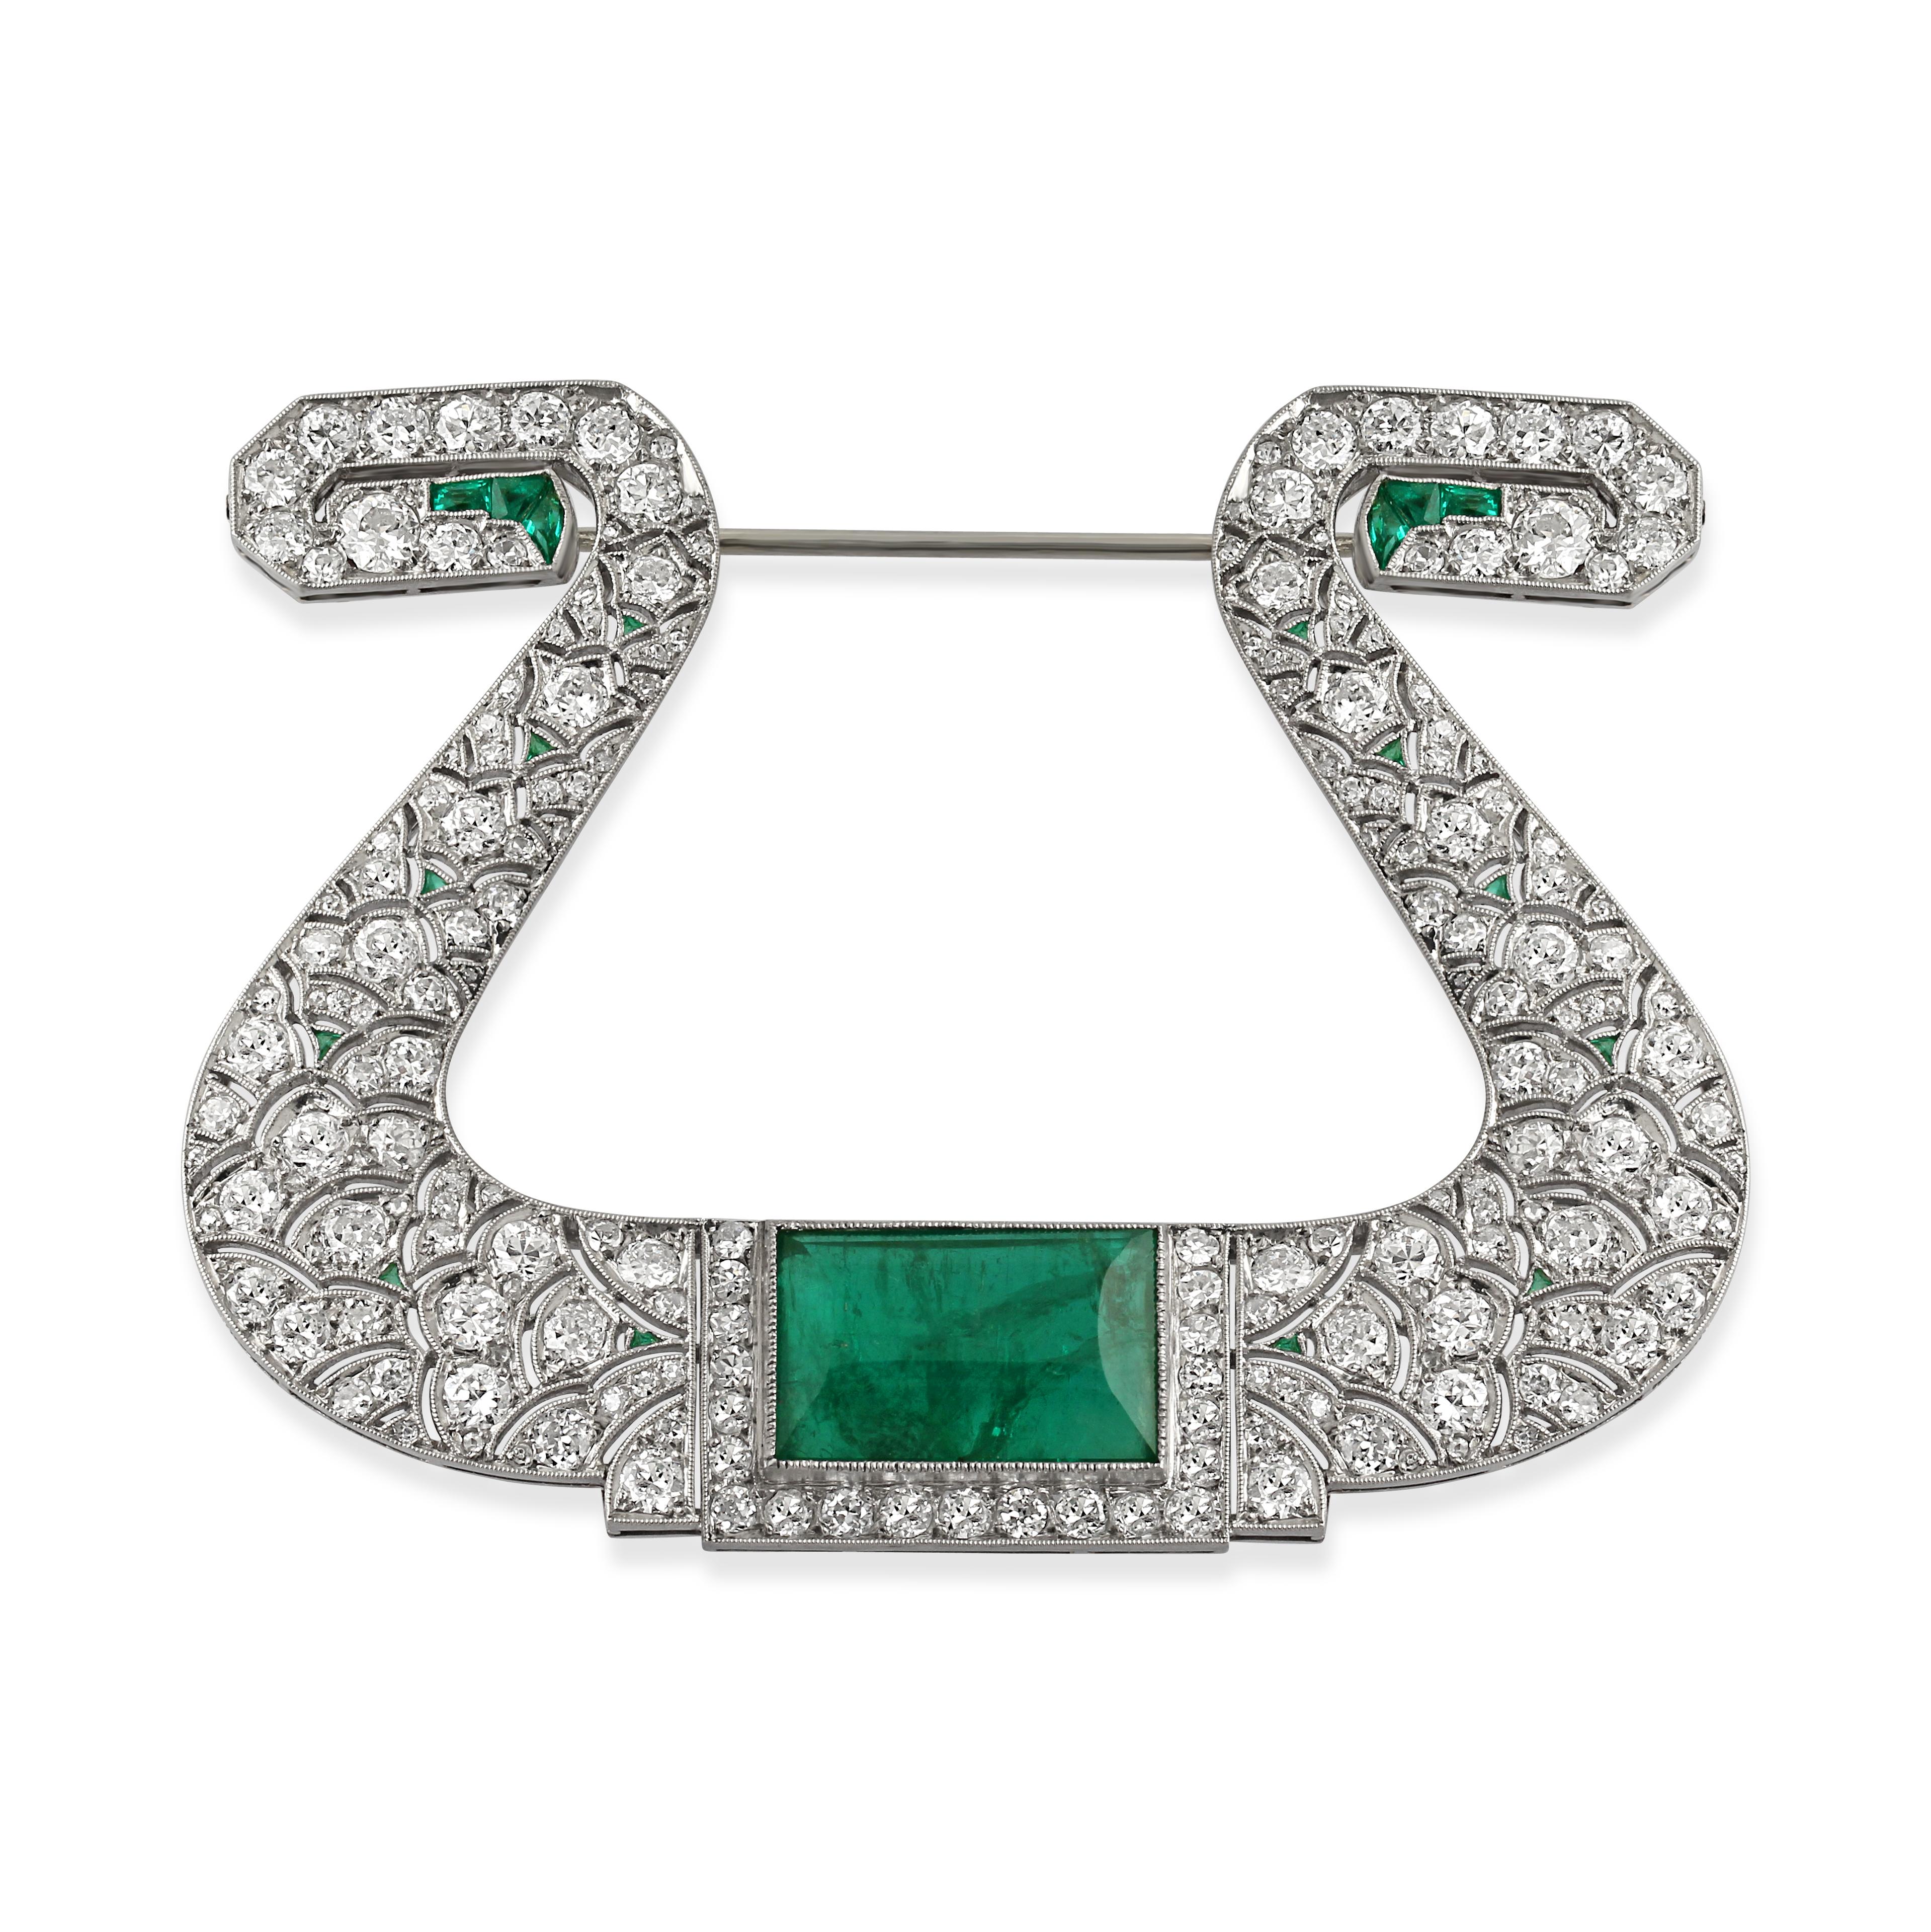 A platinum, diamond & emerald horseshoe brooch. Set with a step-cut emerald surrounded by single and circle-cut diamonds and highlighted by calibré-cut emeralds. Origin: French, with unknown maker's marks. Circa 1920s.